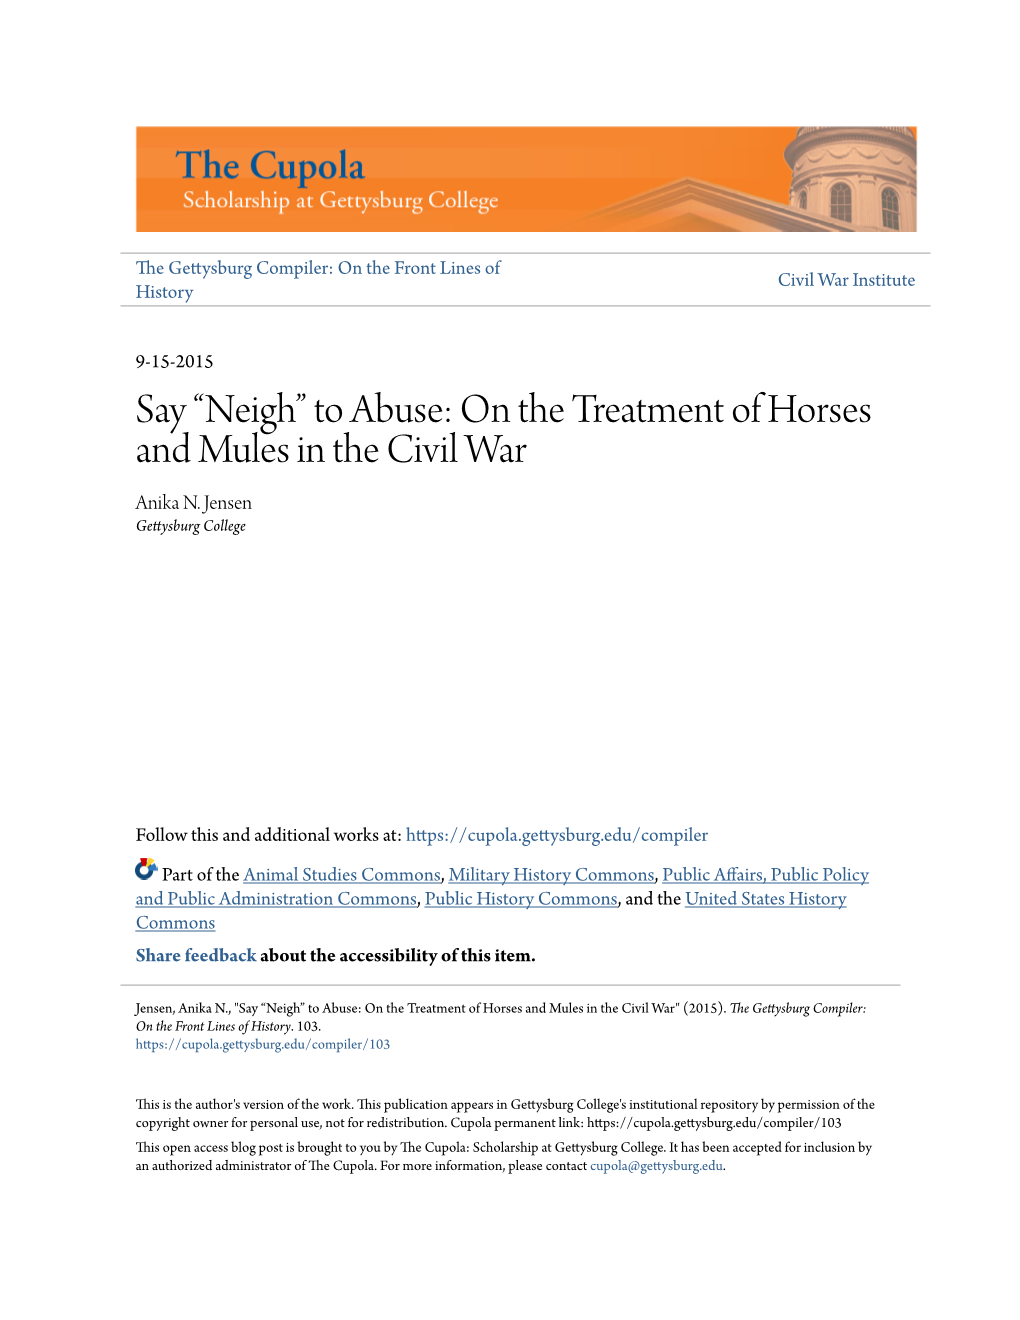 Say “Neigh” to Abuse: on the Treatment of Horses and Mules in the Civil War Anika N